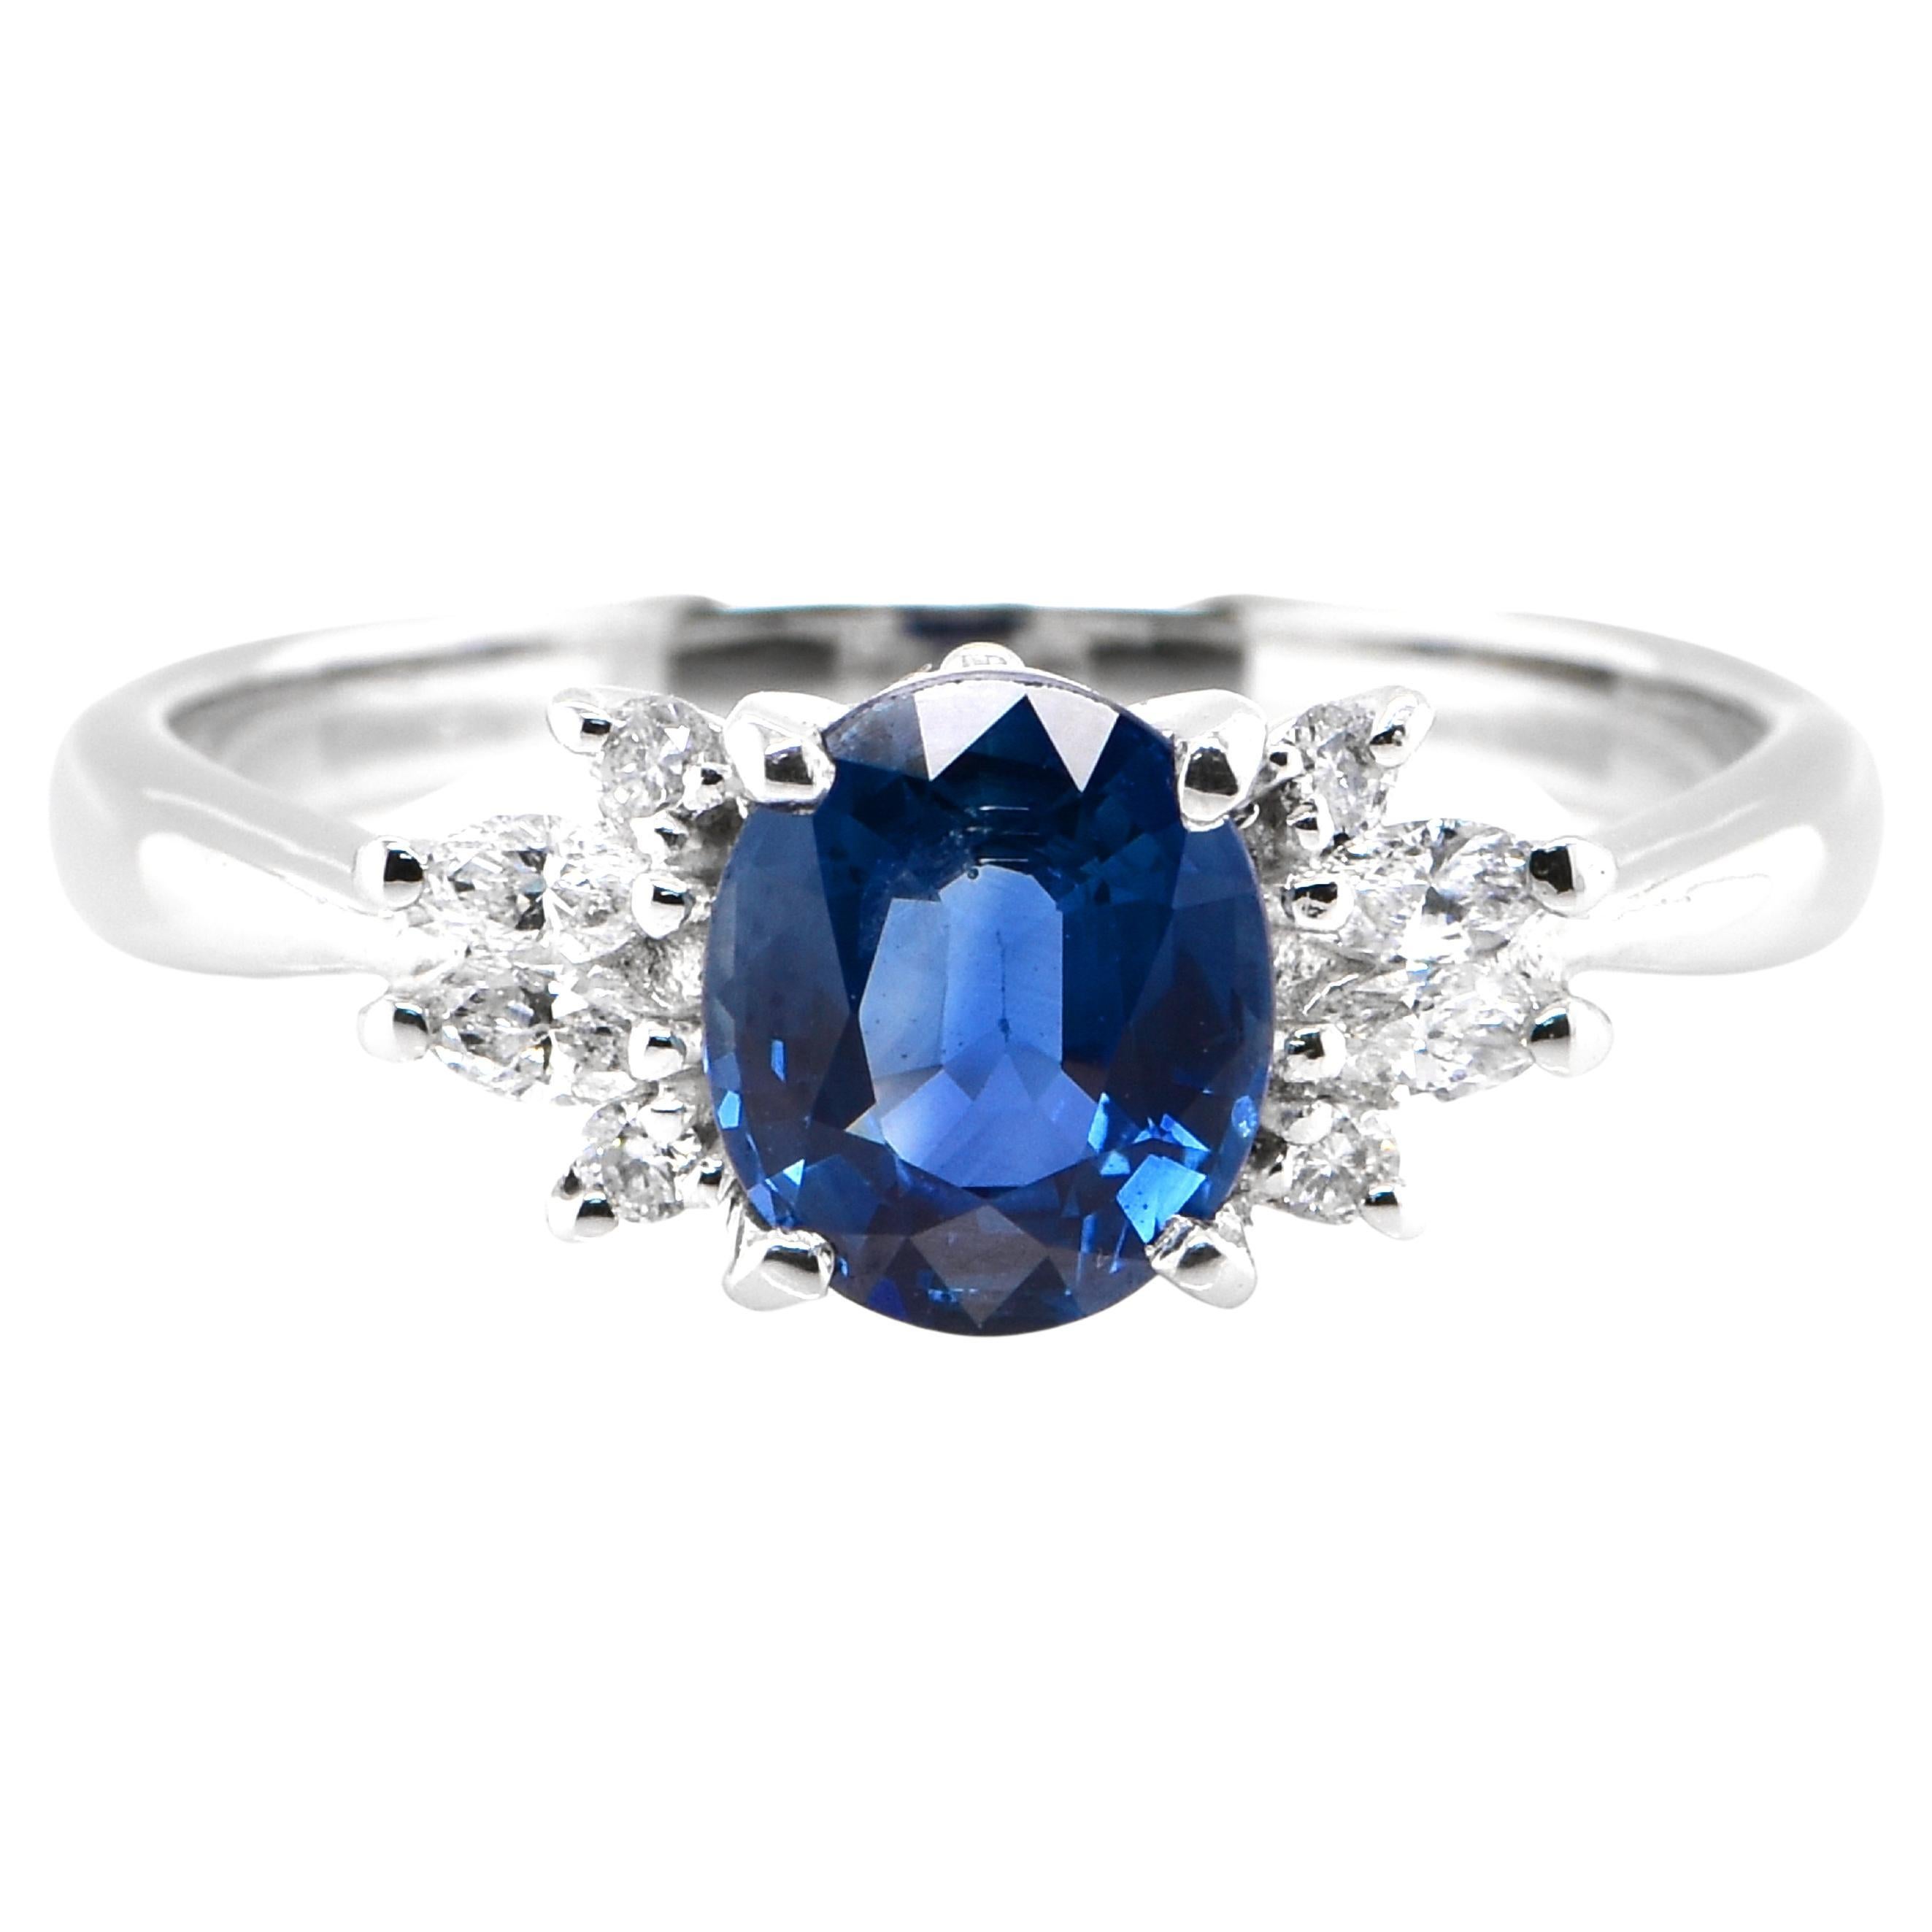 1.61 Carat Natural Blue Sapphire and Diamond Made in Platinum